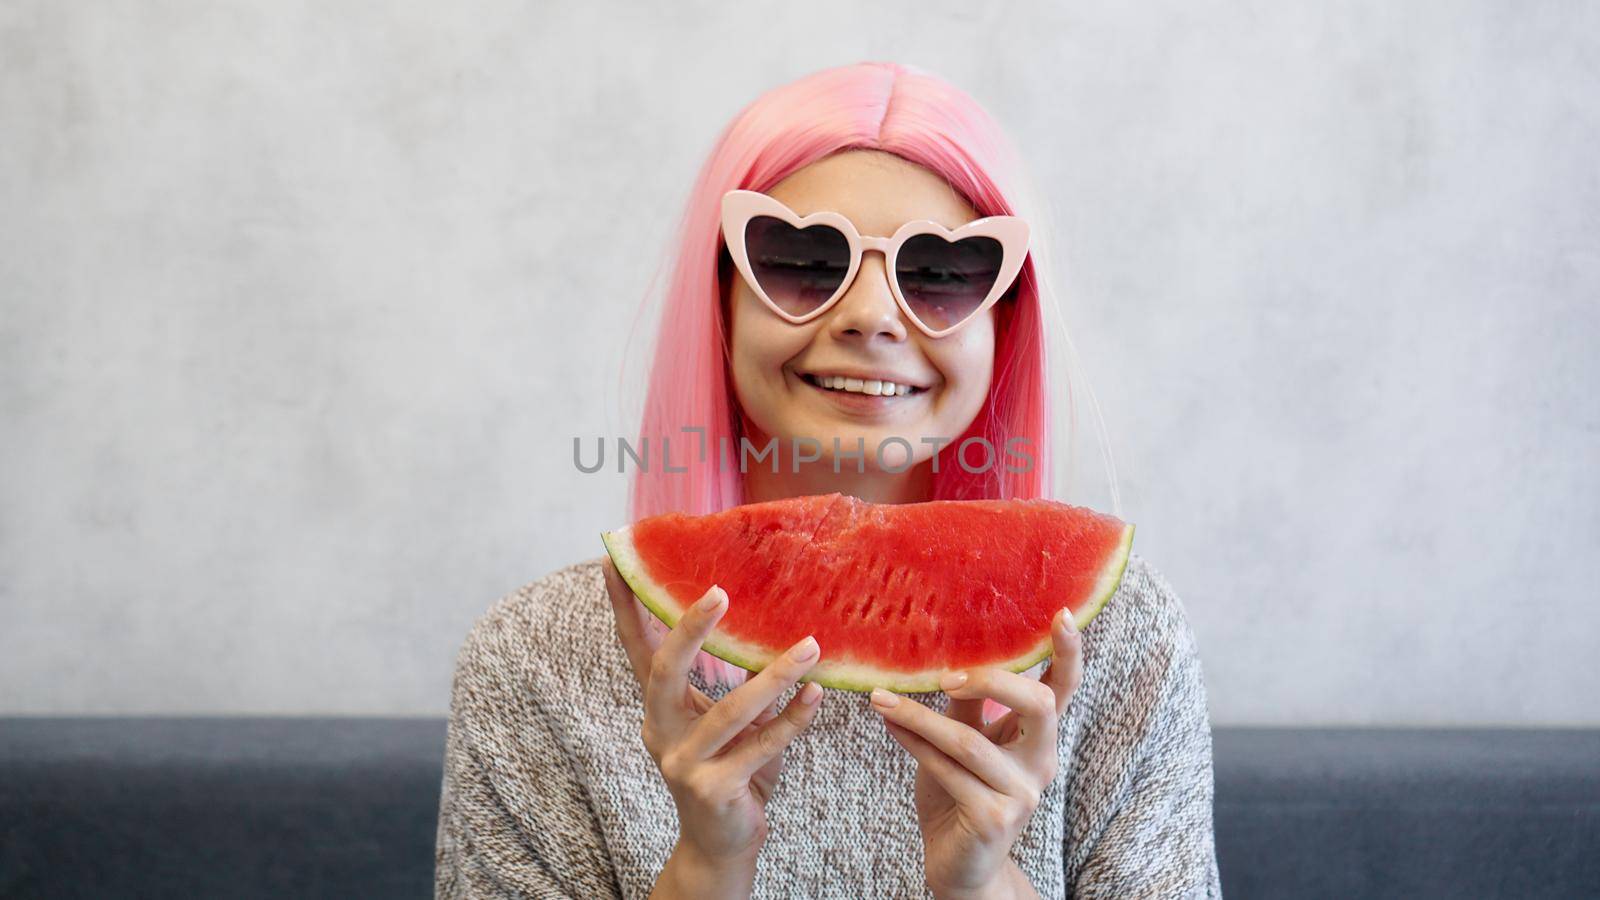 Indoor shot of young woman with piece of watermelon in hand, adorable female smiling at camera. Woman wears pink wig and heart-shaped glasses